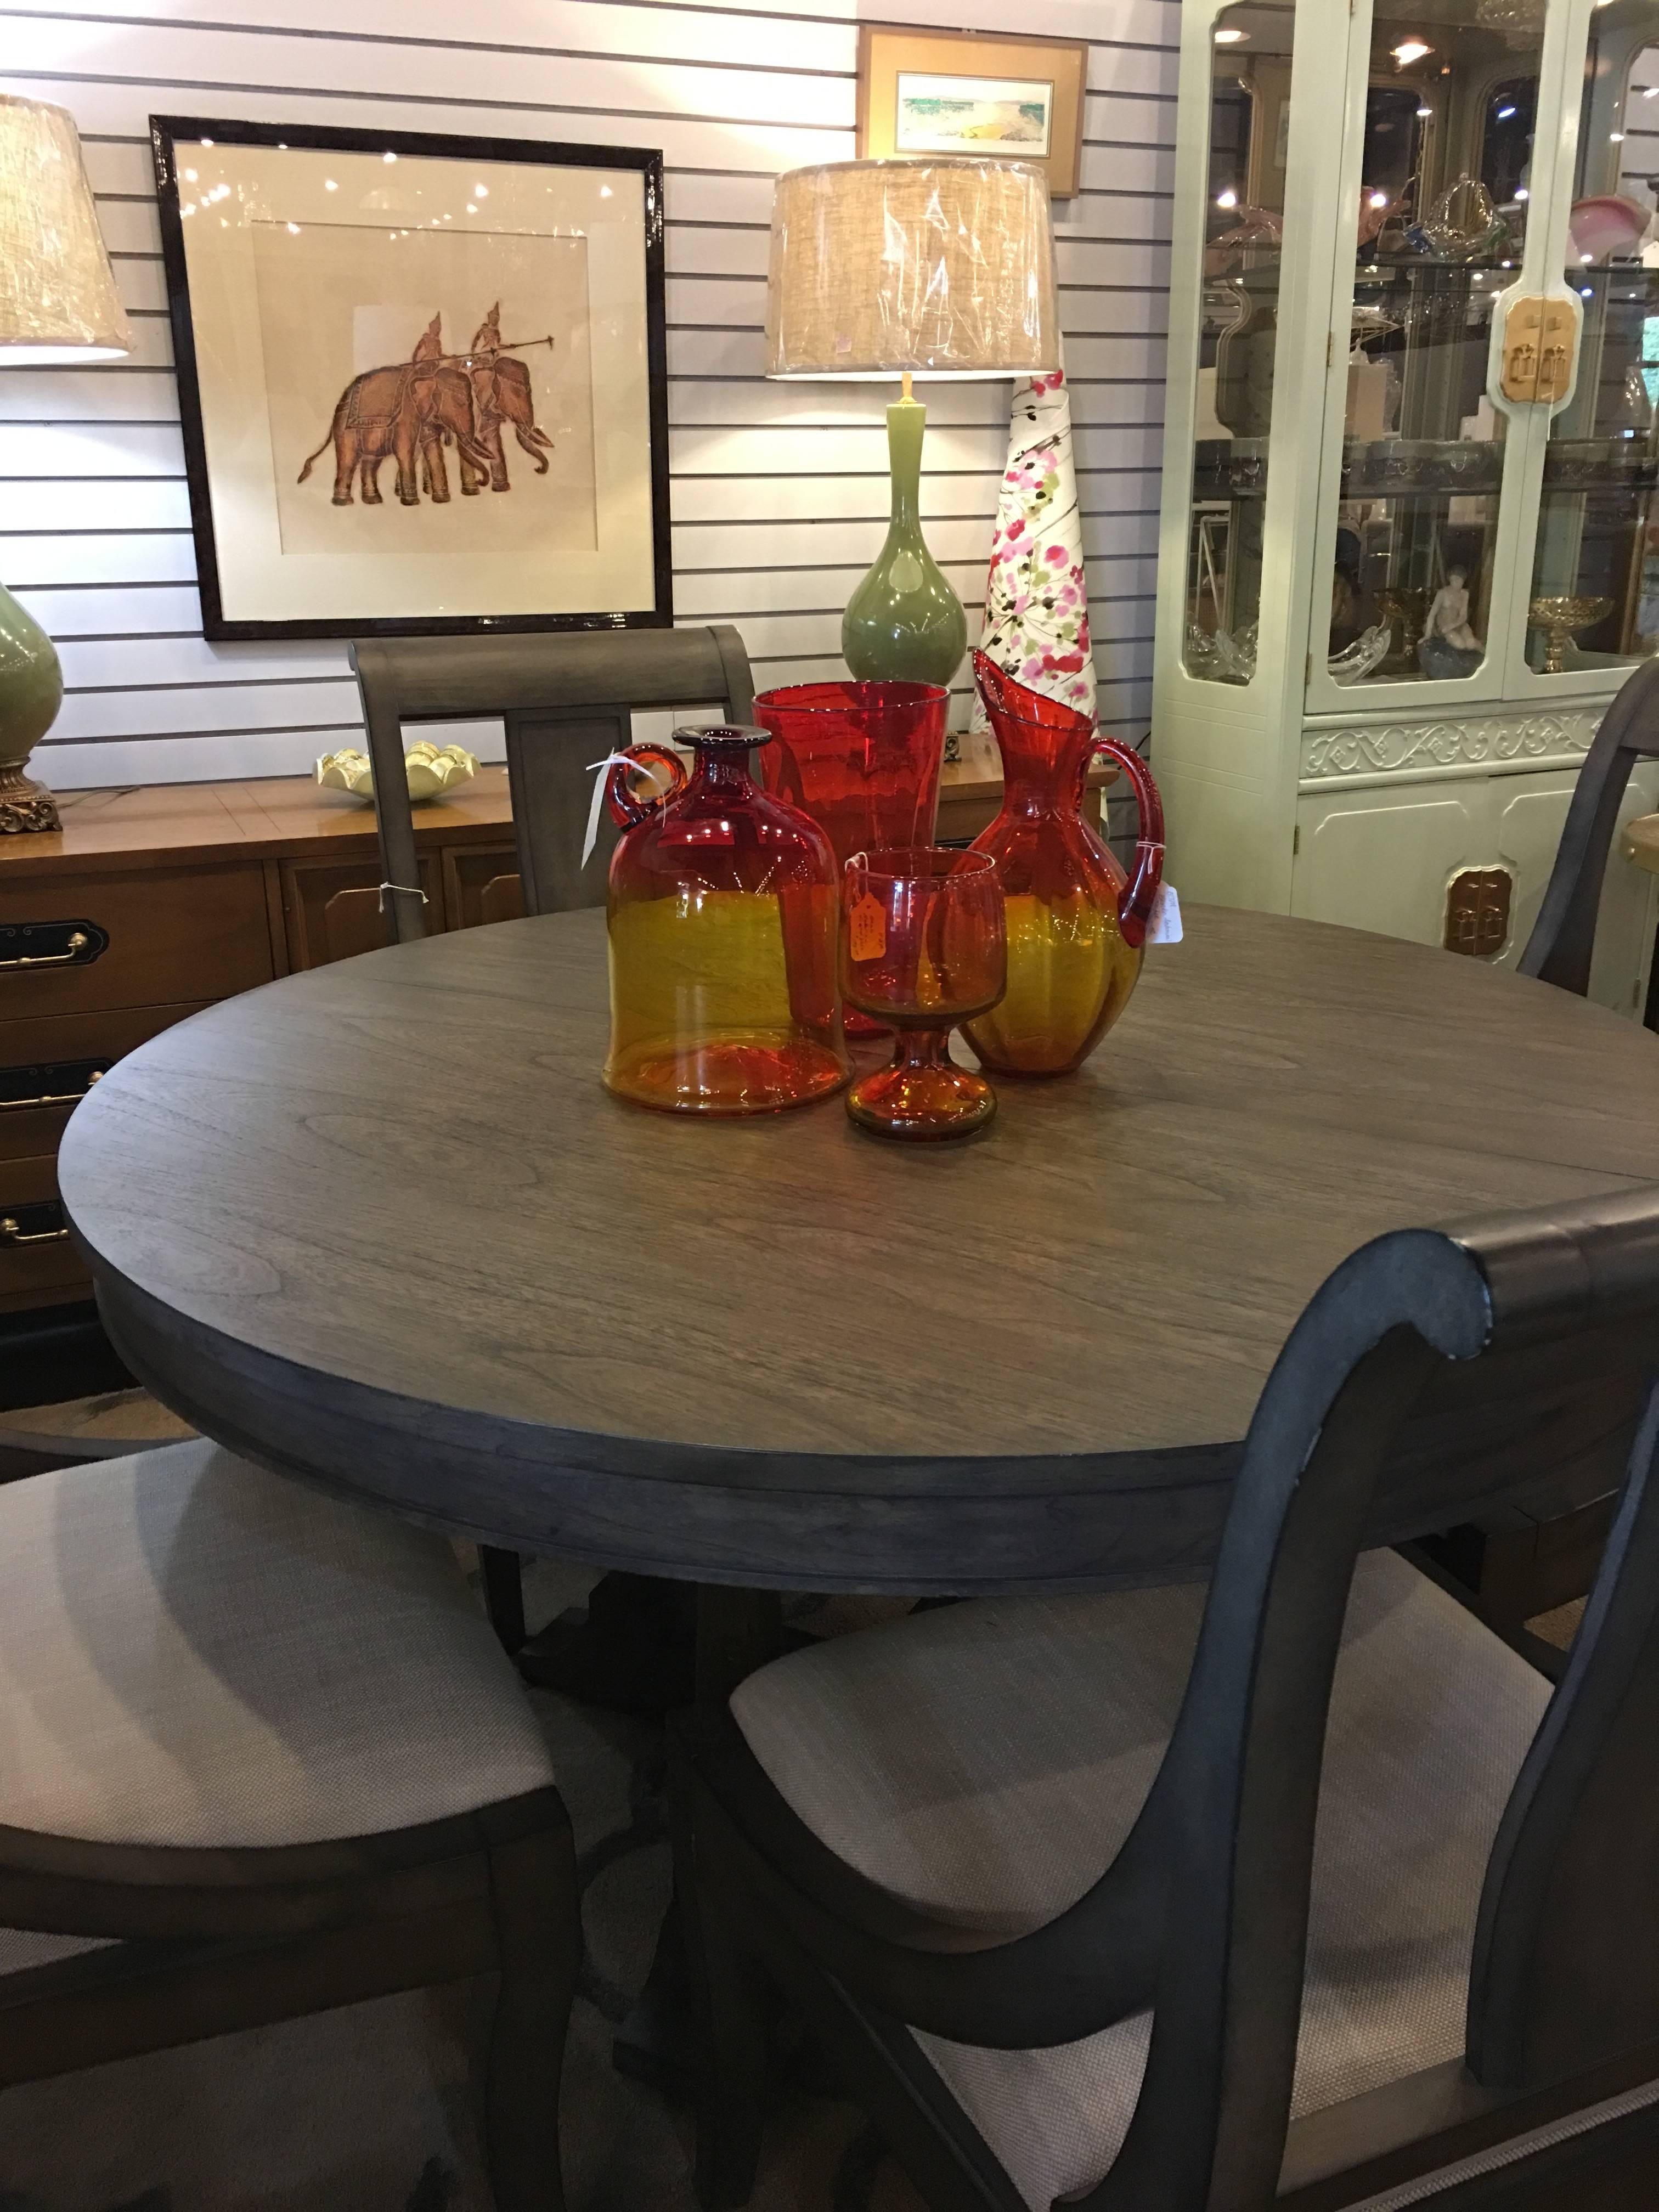 This very sturdy set is by Hekman and is very well built and heavy. The table has a 20 inch; leaf which increases it size to 74 inches large enough to easily seat eight. The diameter without the leaf is 54 inches, making it a perfect dinette table,